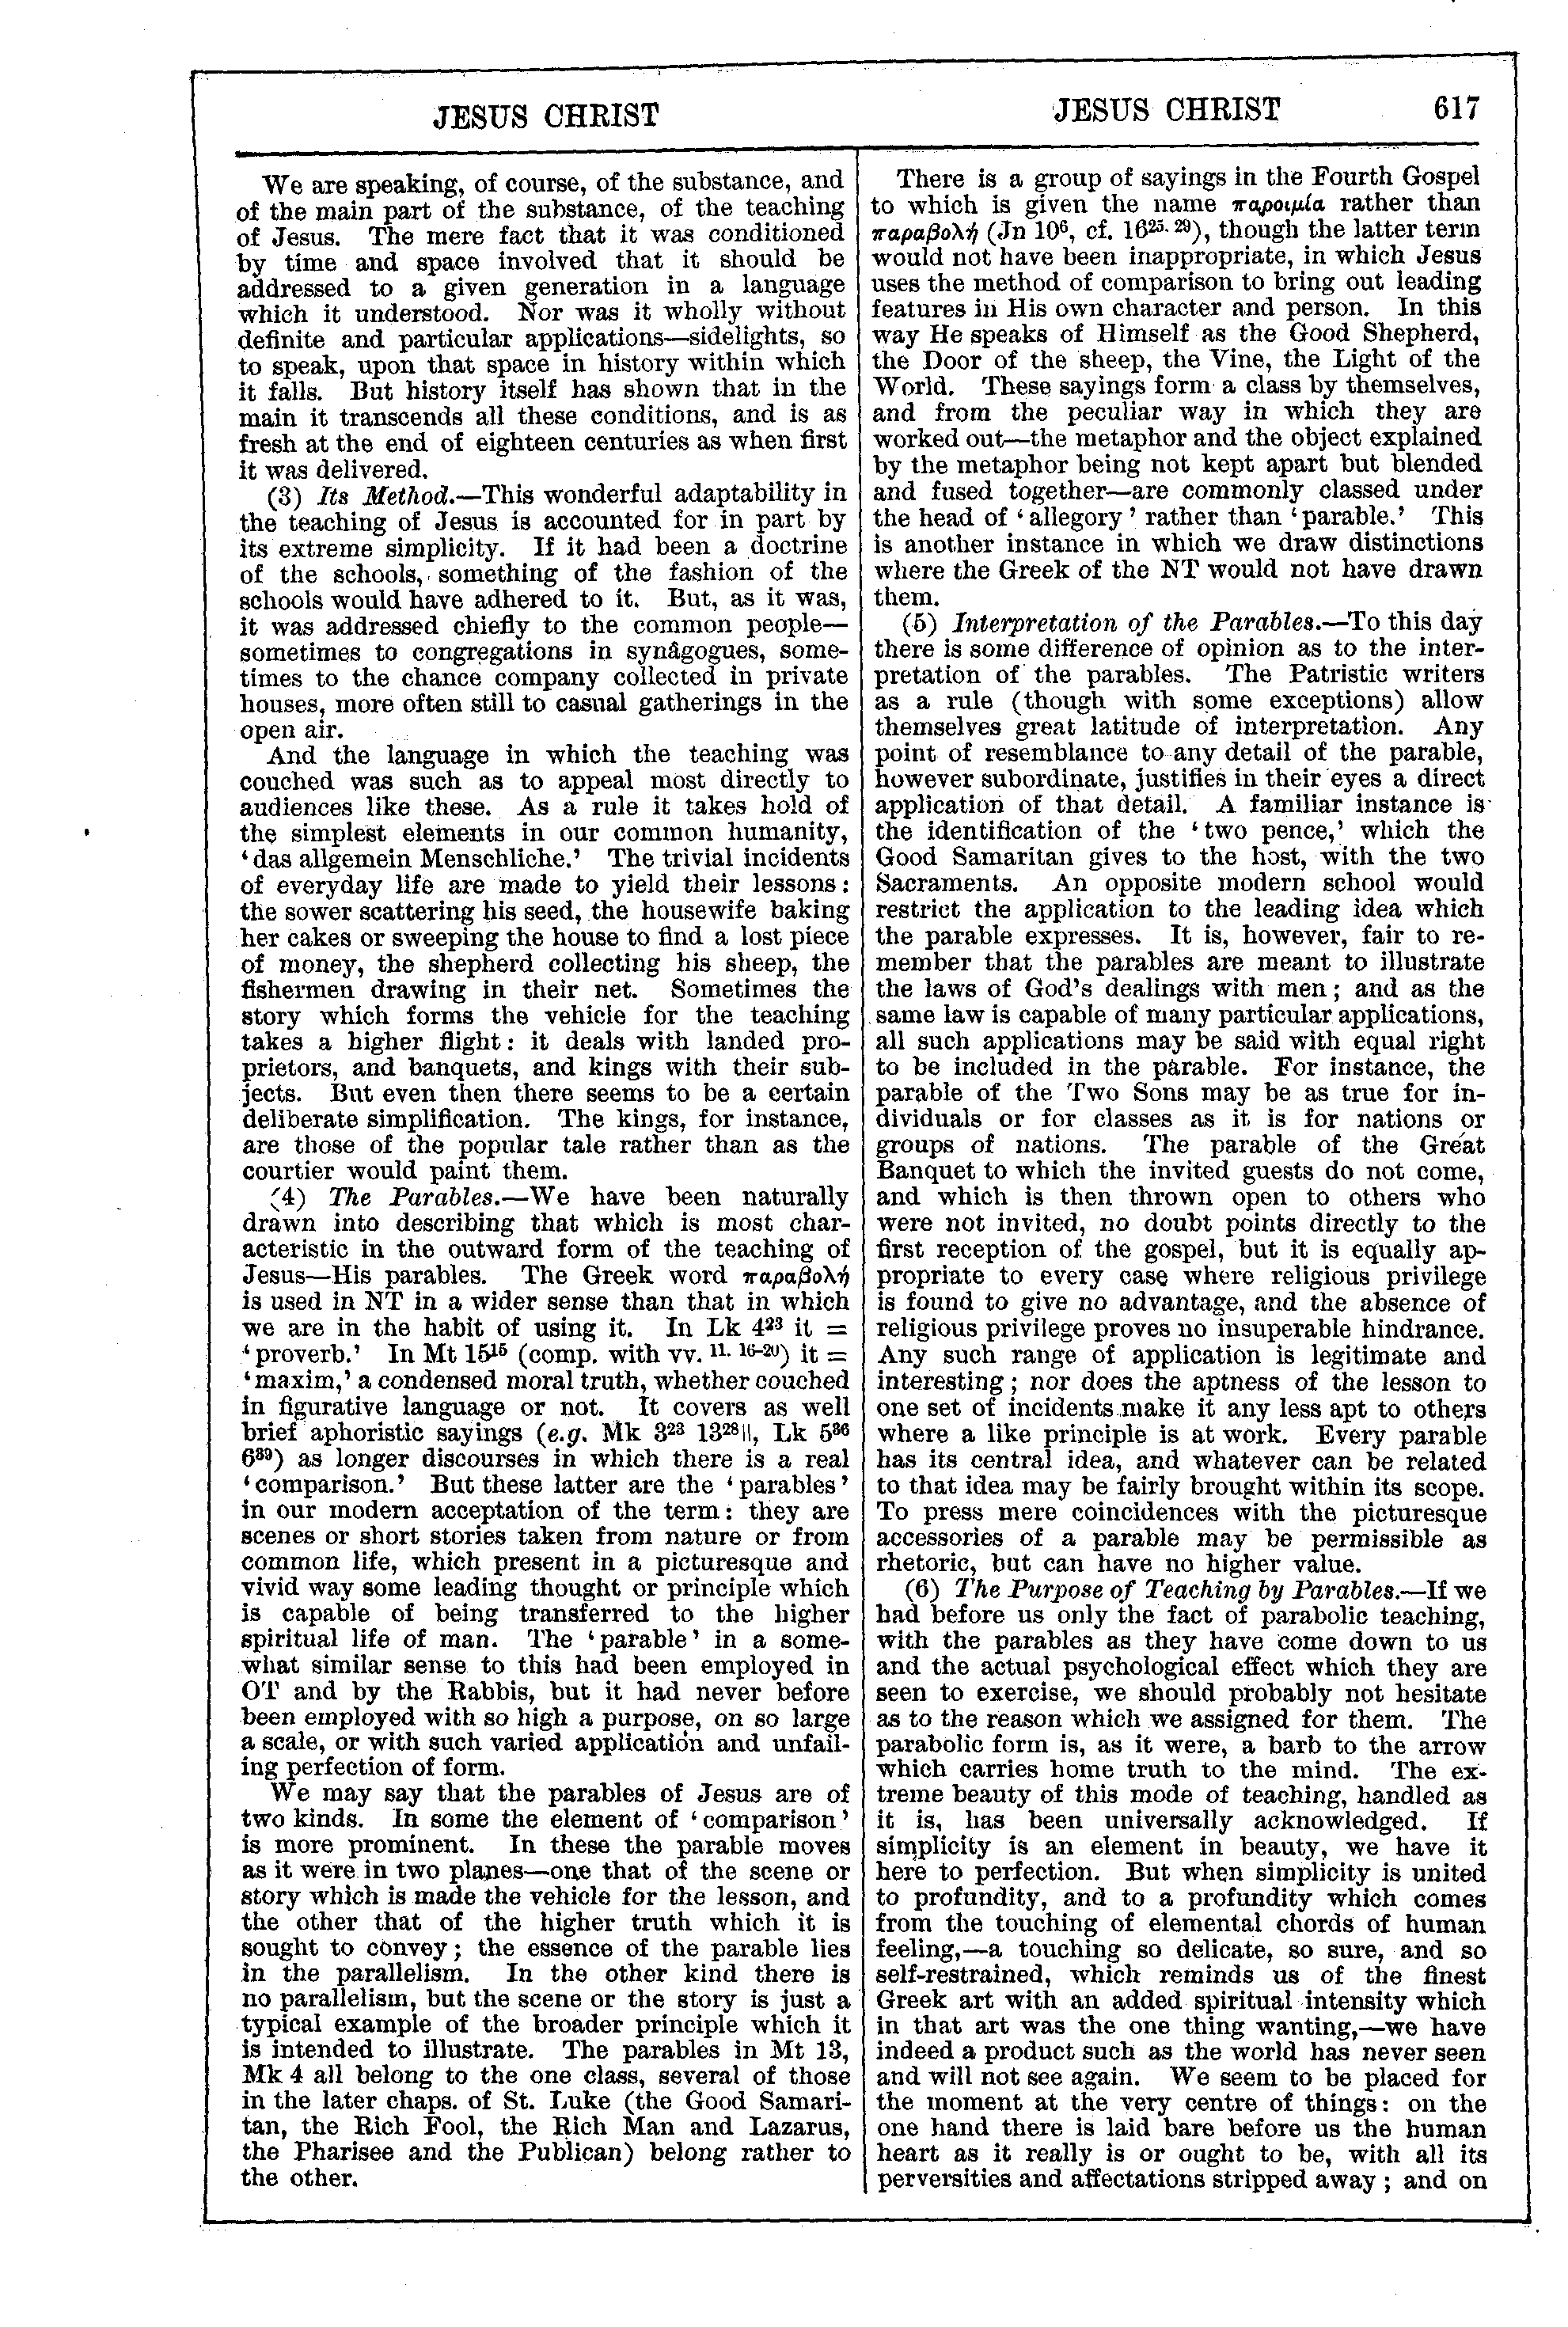 Image of page 617